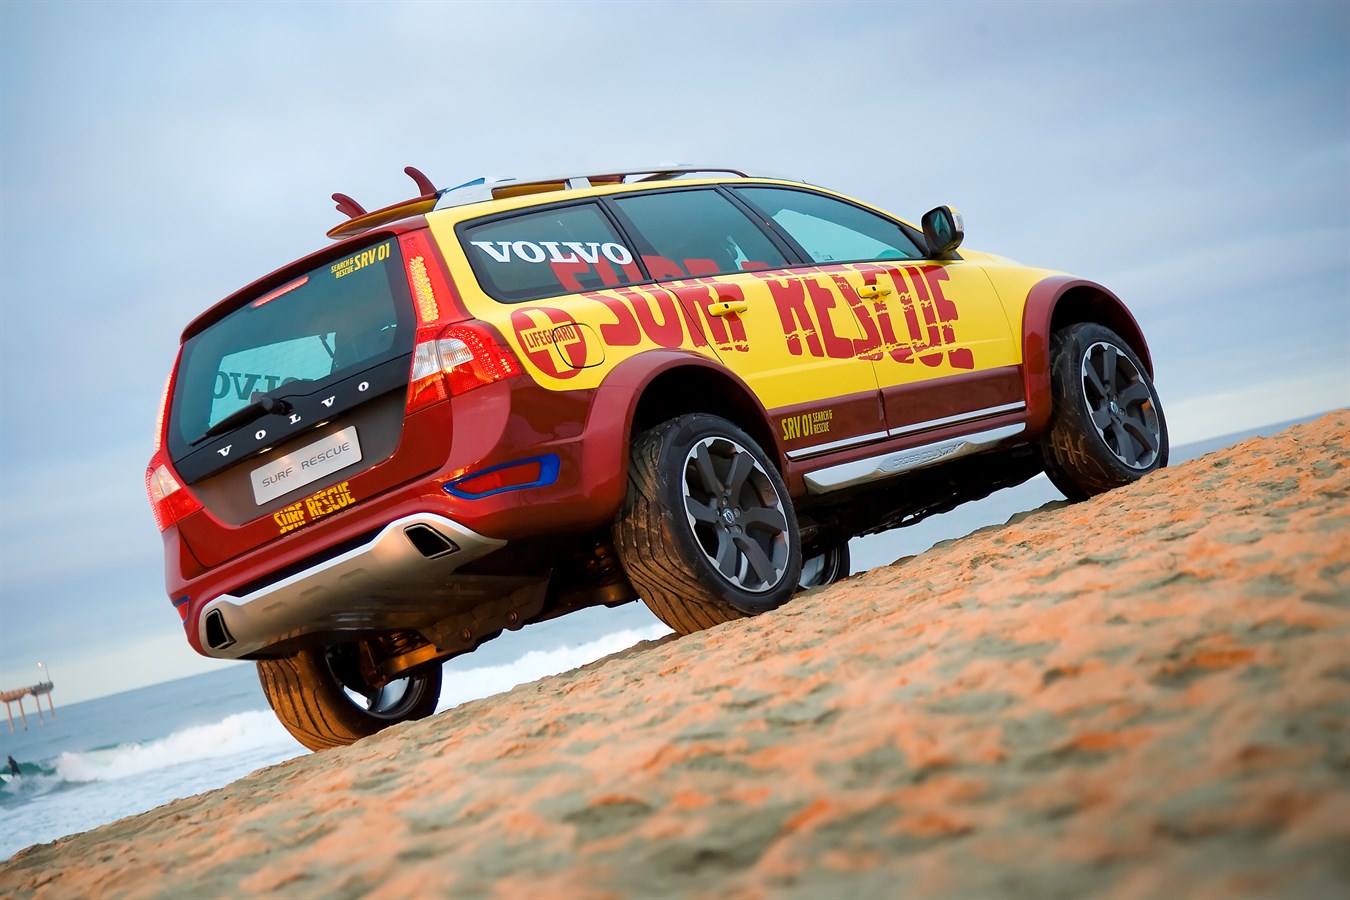 Volvo XC70 Surf Rescue Safety - Concept to Reality, Safety Comes First -  Volvo Car USA Newsroom